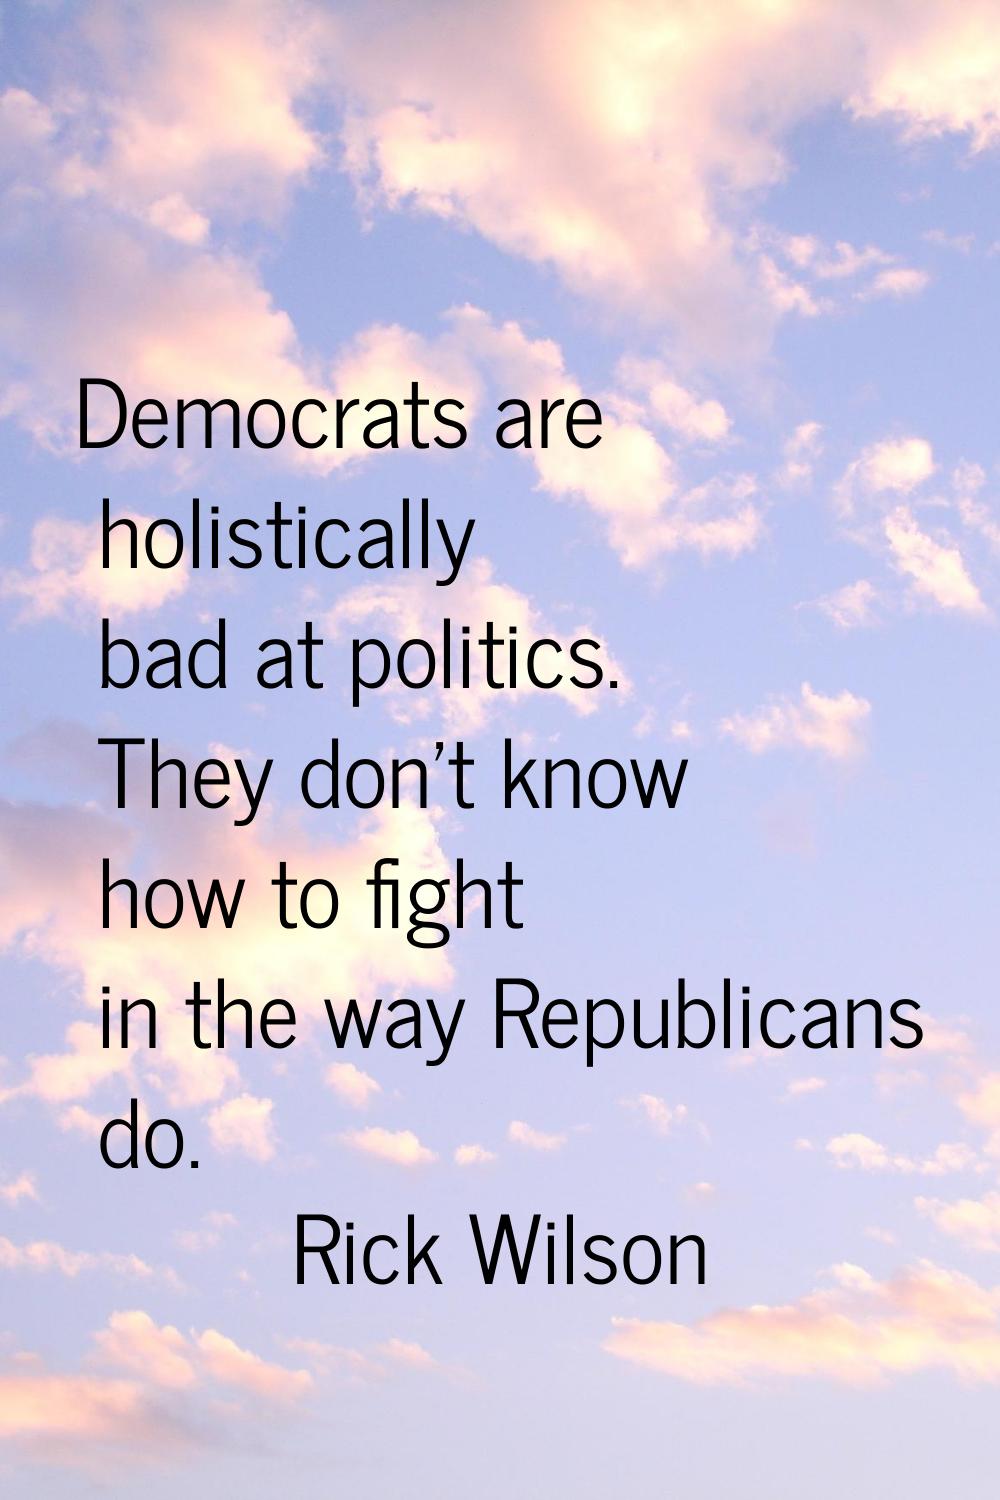 Democrats are holistically bad at politics. They don't know how to fight in the way Republicans do.